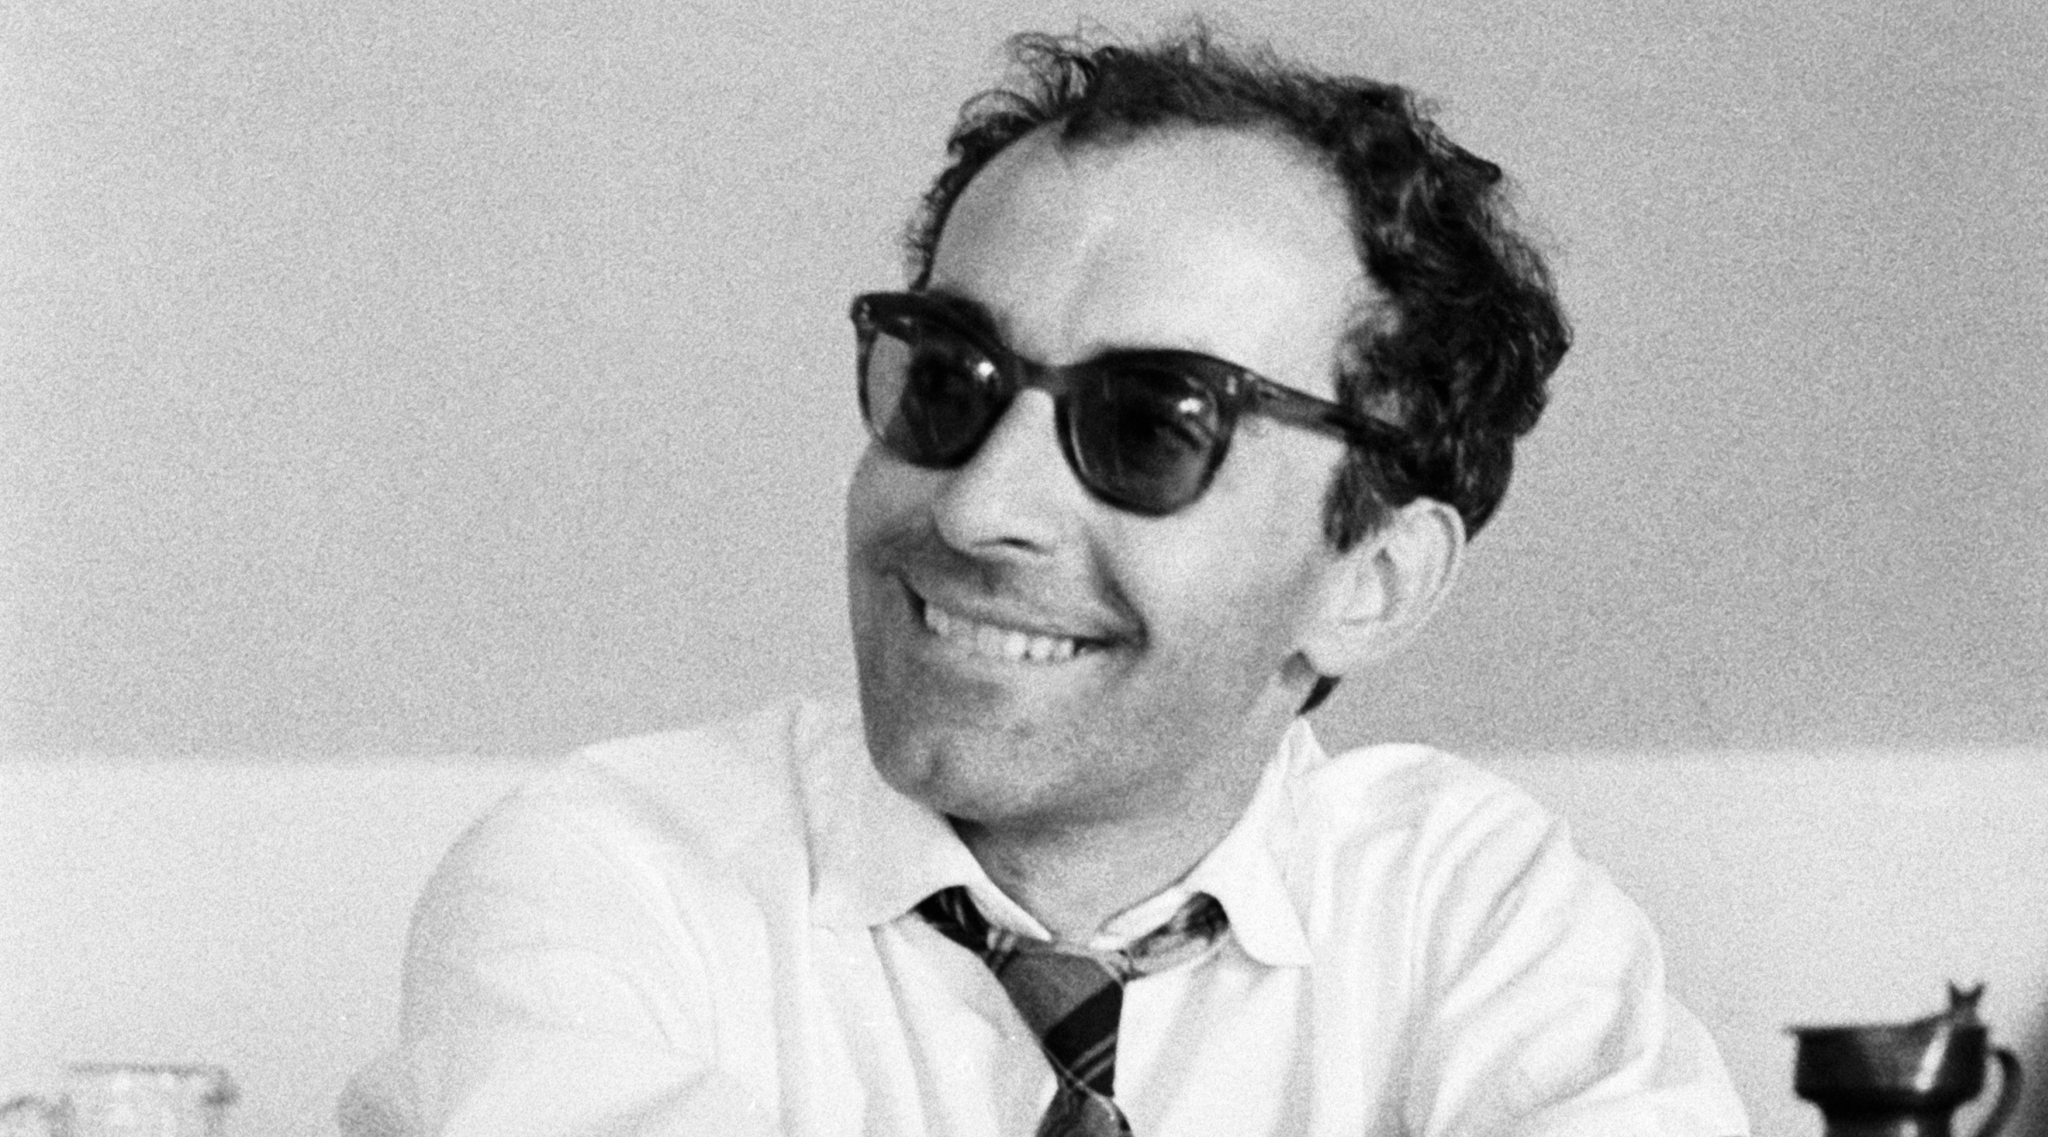 Jean-Luc Godard, Iconoclastic French New Wave Director, Dies at 91